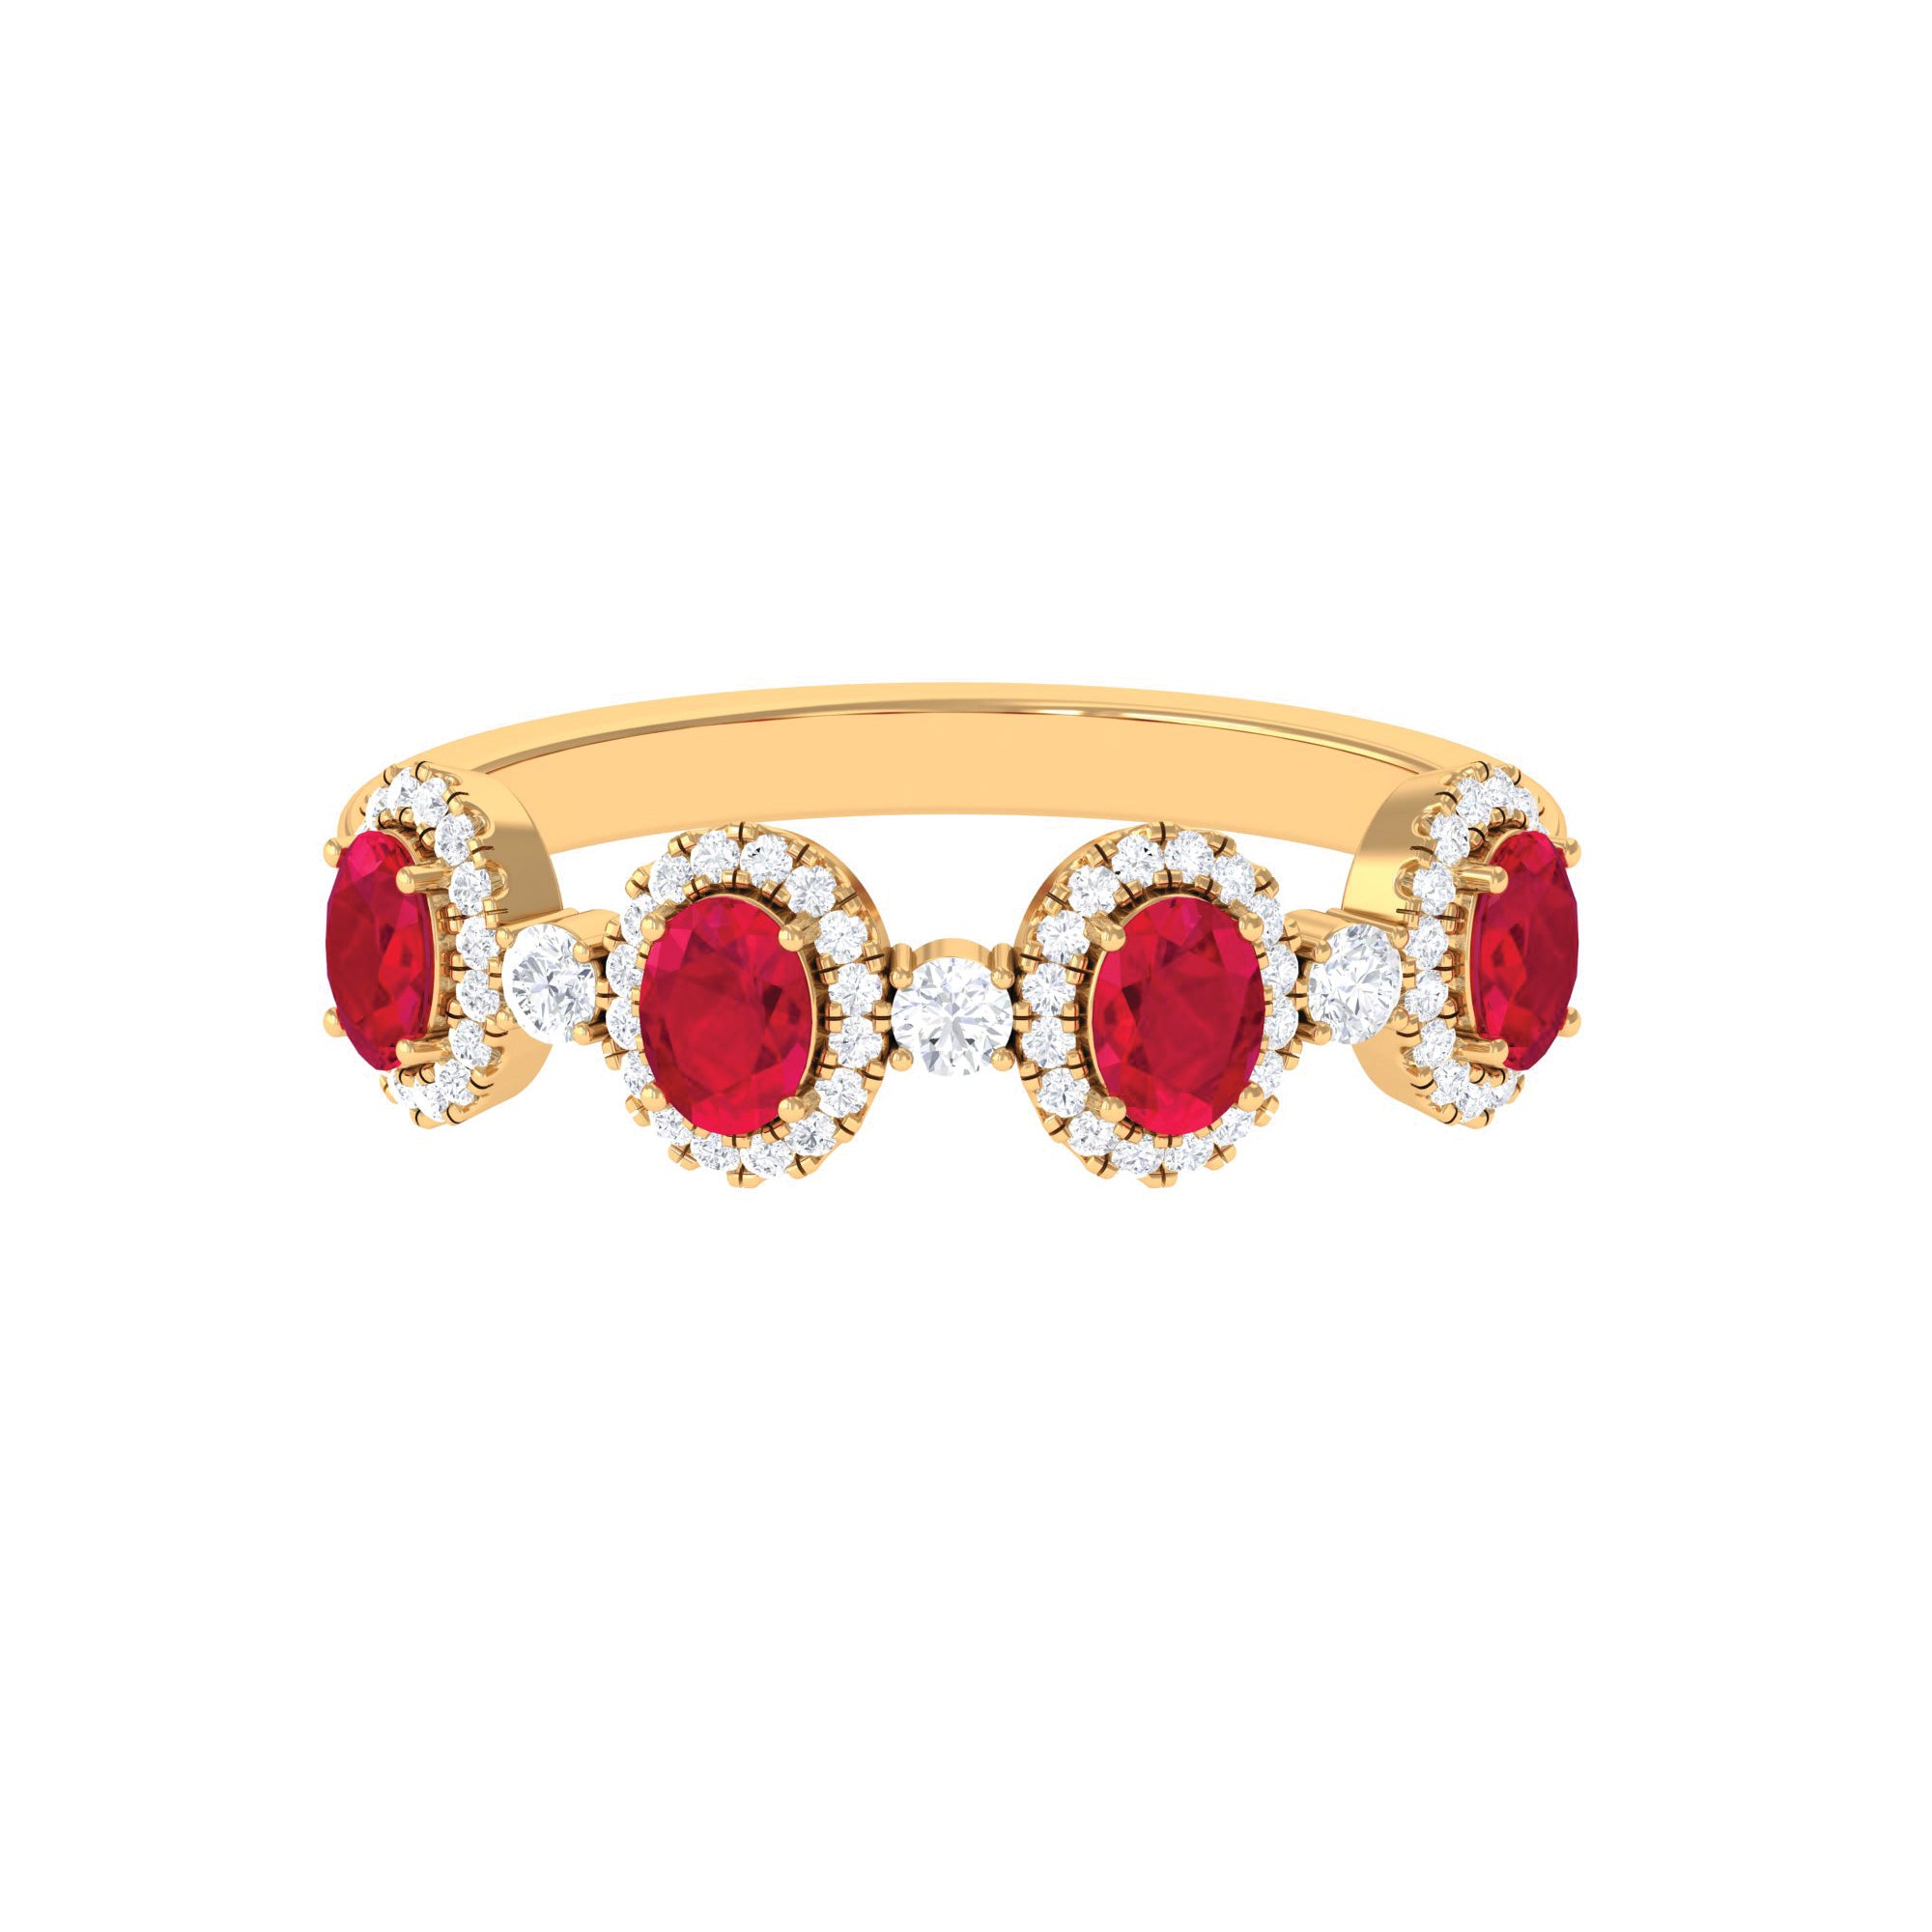 1.5 CT Lab Created Ruby and Diamond Wedding Band Lab Created Ruby - ( AAAA ) - Quality - Rosec Jewels